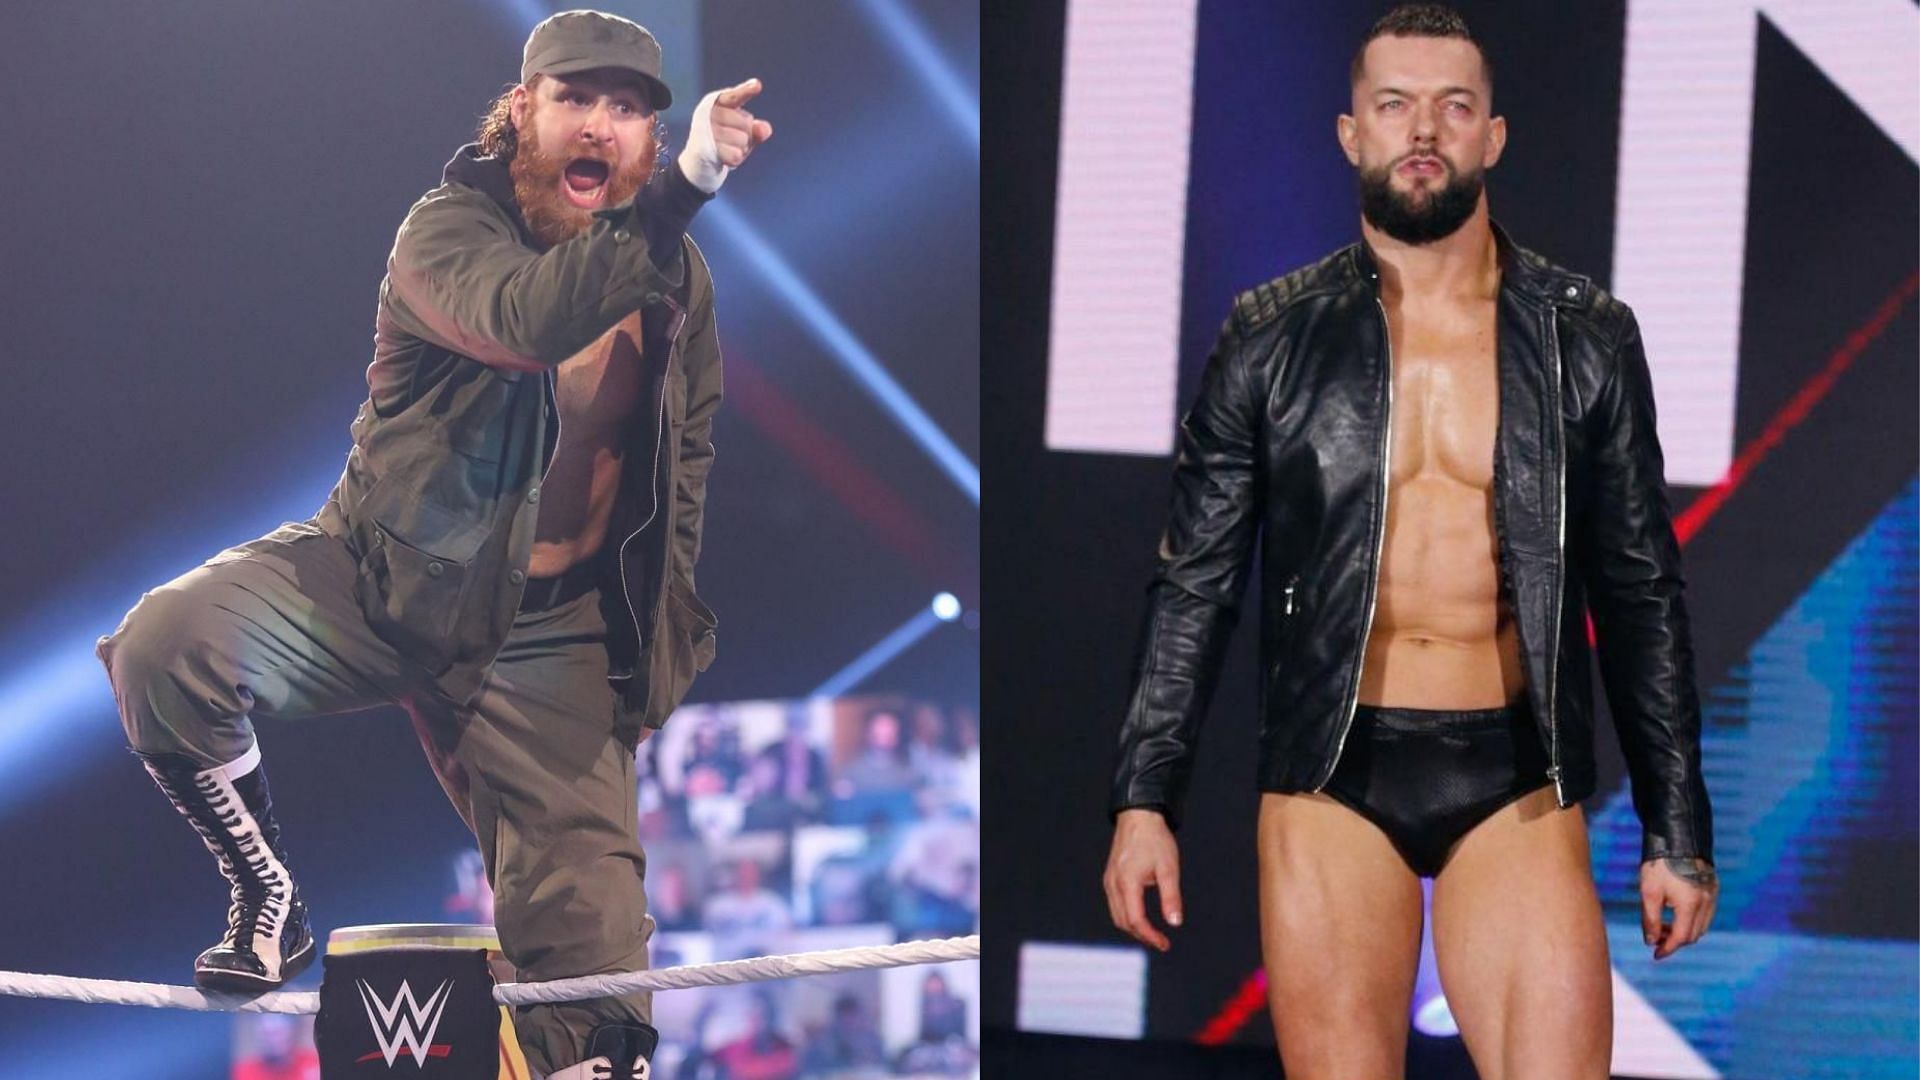 Could WWE&#039;s Sami Zayn (left) and Finn Balor (right) make the jump to AEW in 2022?